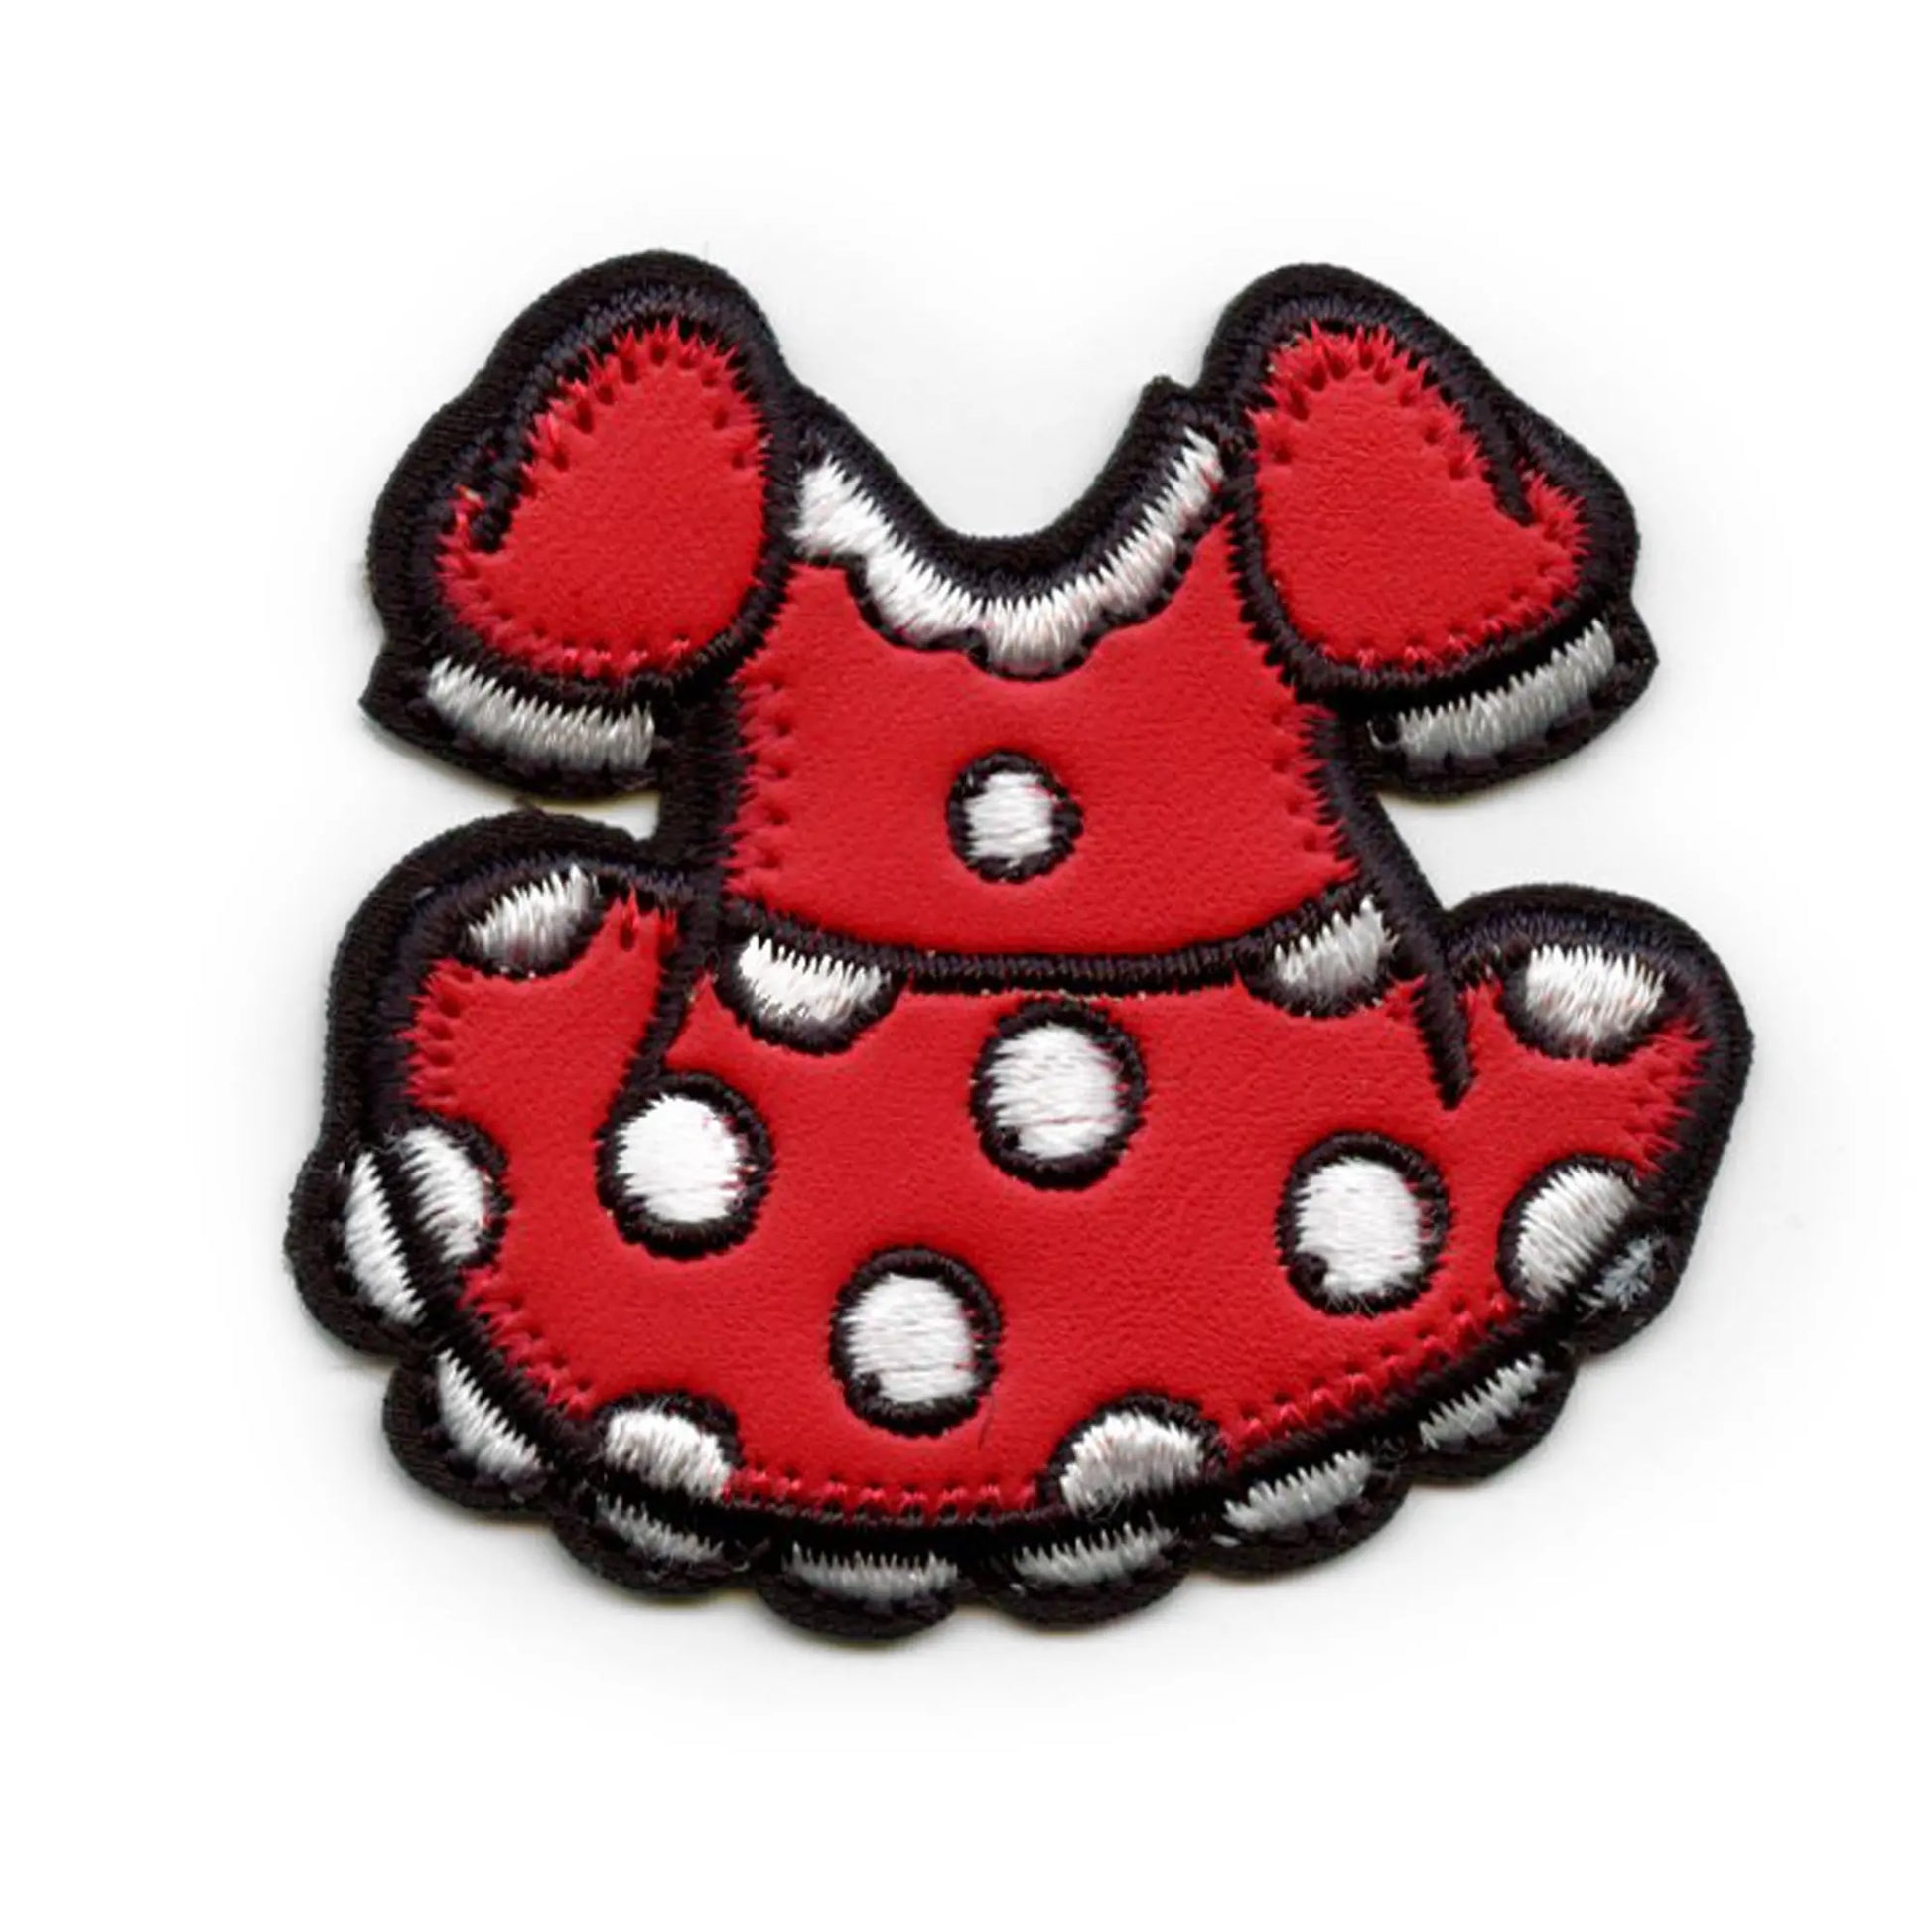 Mickey Mouse iron on patch, Minnie mouse embroidered iron on patch, Disney  patch